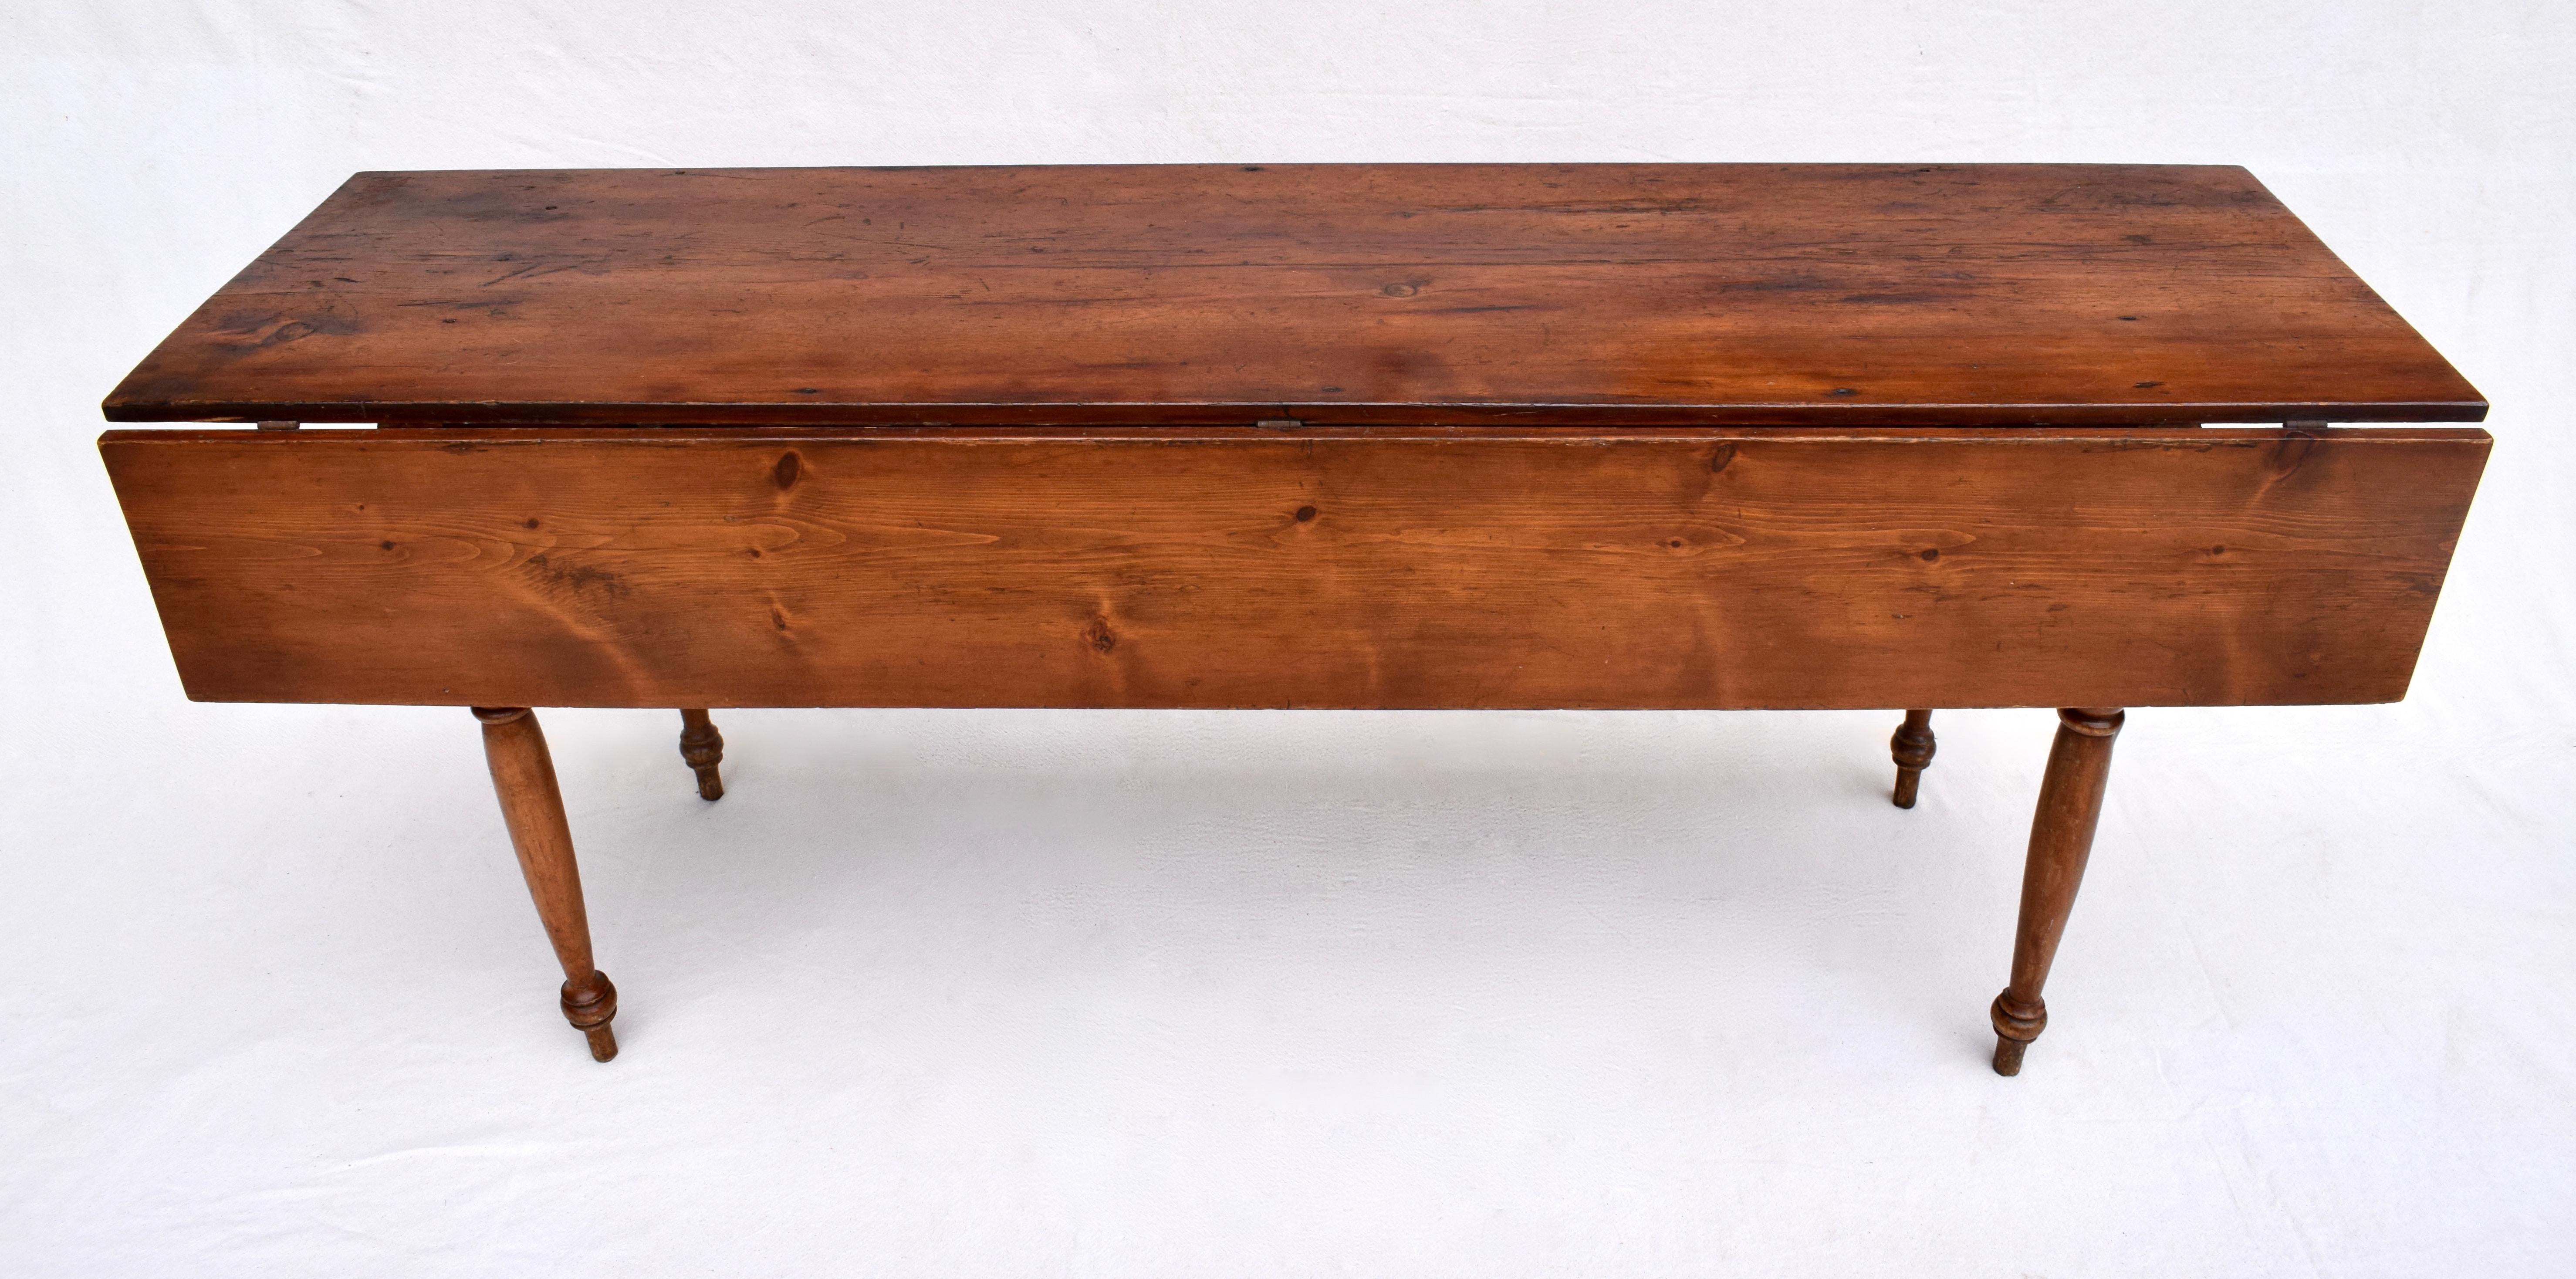 19th c. American drop leaf pine harvest farm table with finely turned peg constructed legs. Depth of table with leaves closed: 20.75